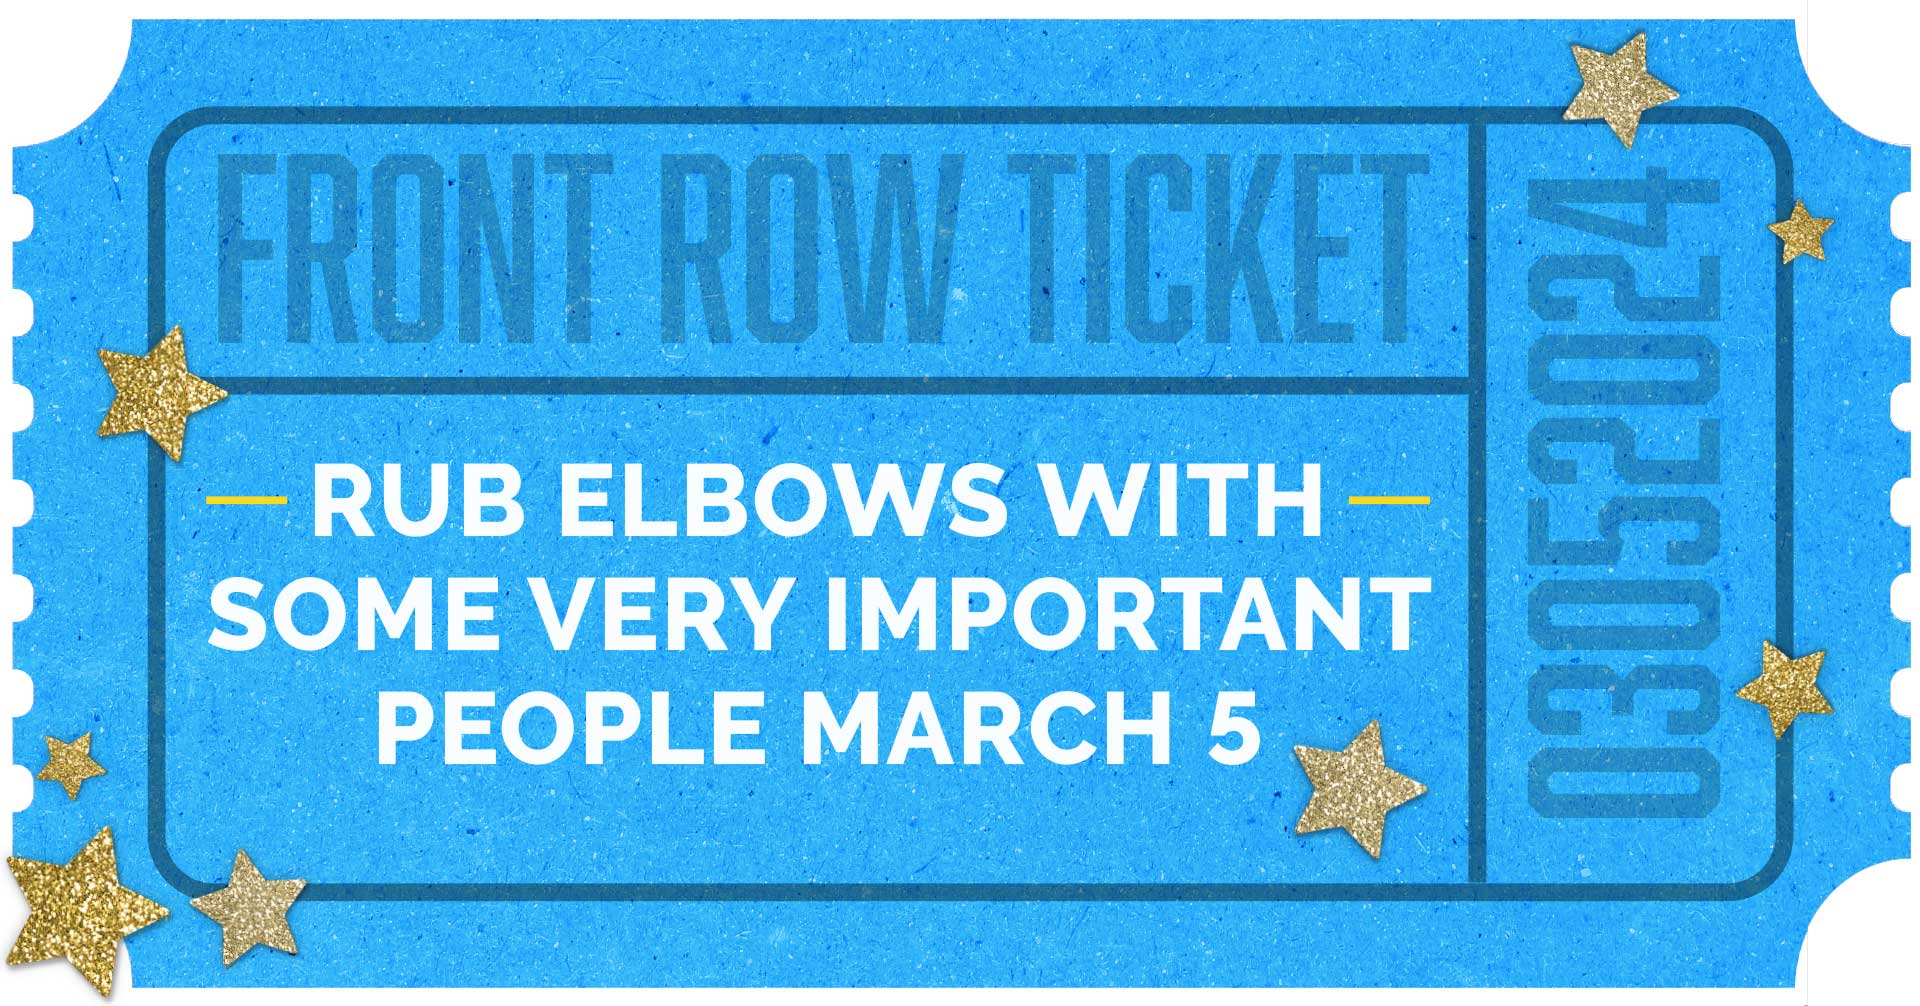 Rub elbows with some very important people March 5